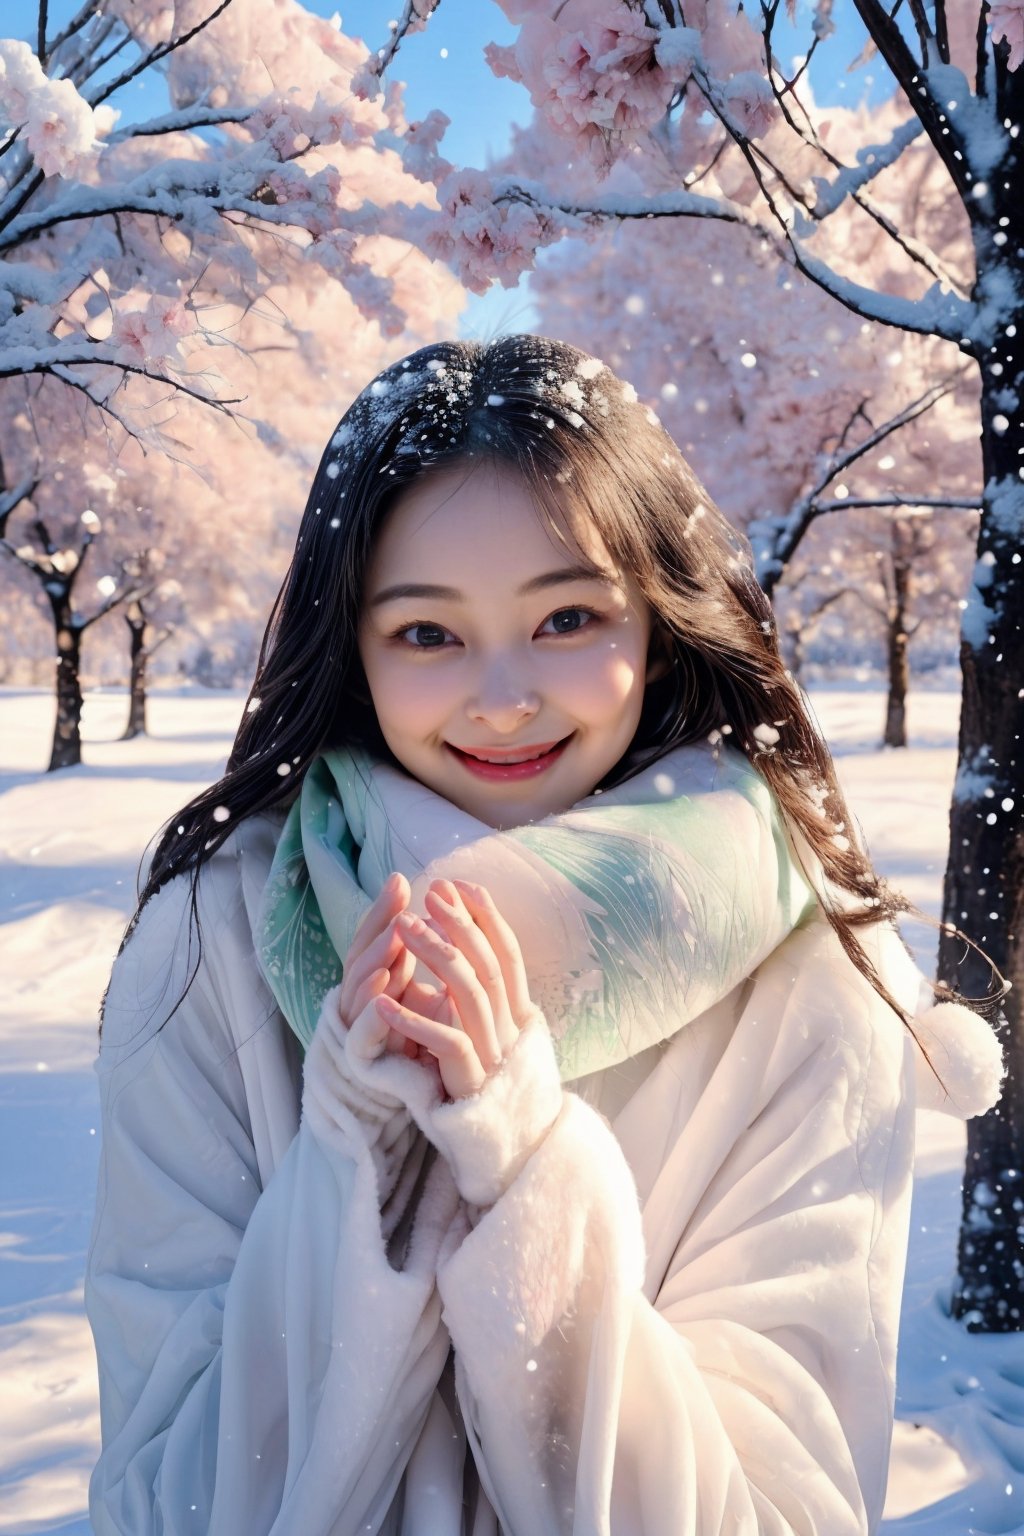 (Fujifilm), real photo, view shot,Winter style, snow falling, plum flowers blooming, A cute big eyes beautiful girl wearing fluffy pink and white fluffy coat and scarf, She smiled brightly and her eyes twinkled with kindness. She held a pink sakura in her hand and smelled the fragrance. Under her feet is a lush green flower and grass, as if she is a part of nature. Her laughter in the breeze adds a touch of childlike innocence to this beautiful scene. Please give her some more background or context so we can add more details ,perfect split lighting,ZGirl,Nature, flowers blooming fantastic and dreamy light romantic lighting bokeh background ,snow_scene_background,1 girl,hands,chinatsumura